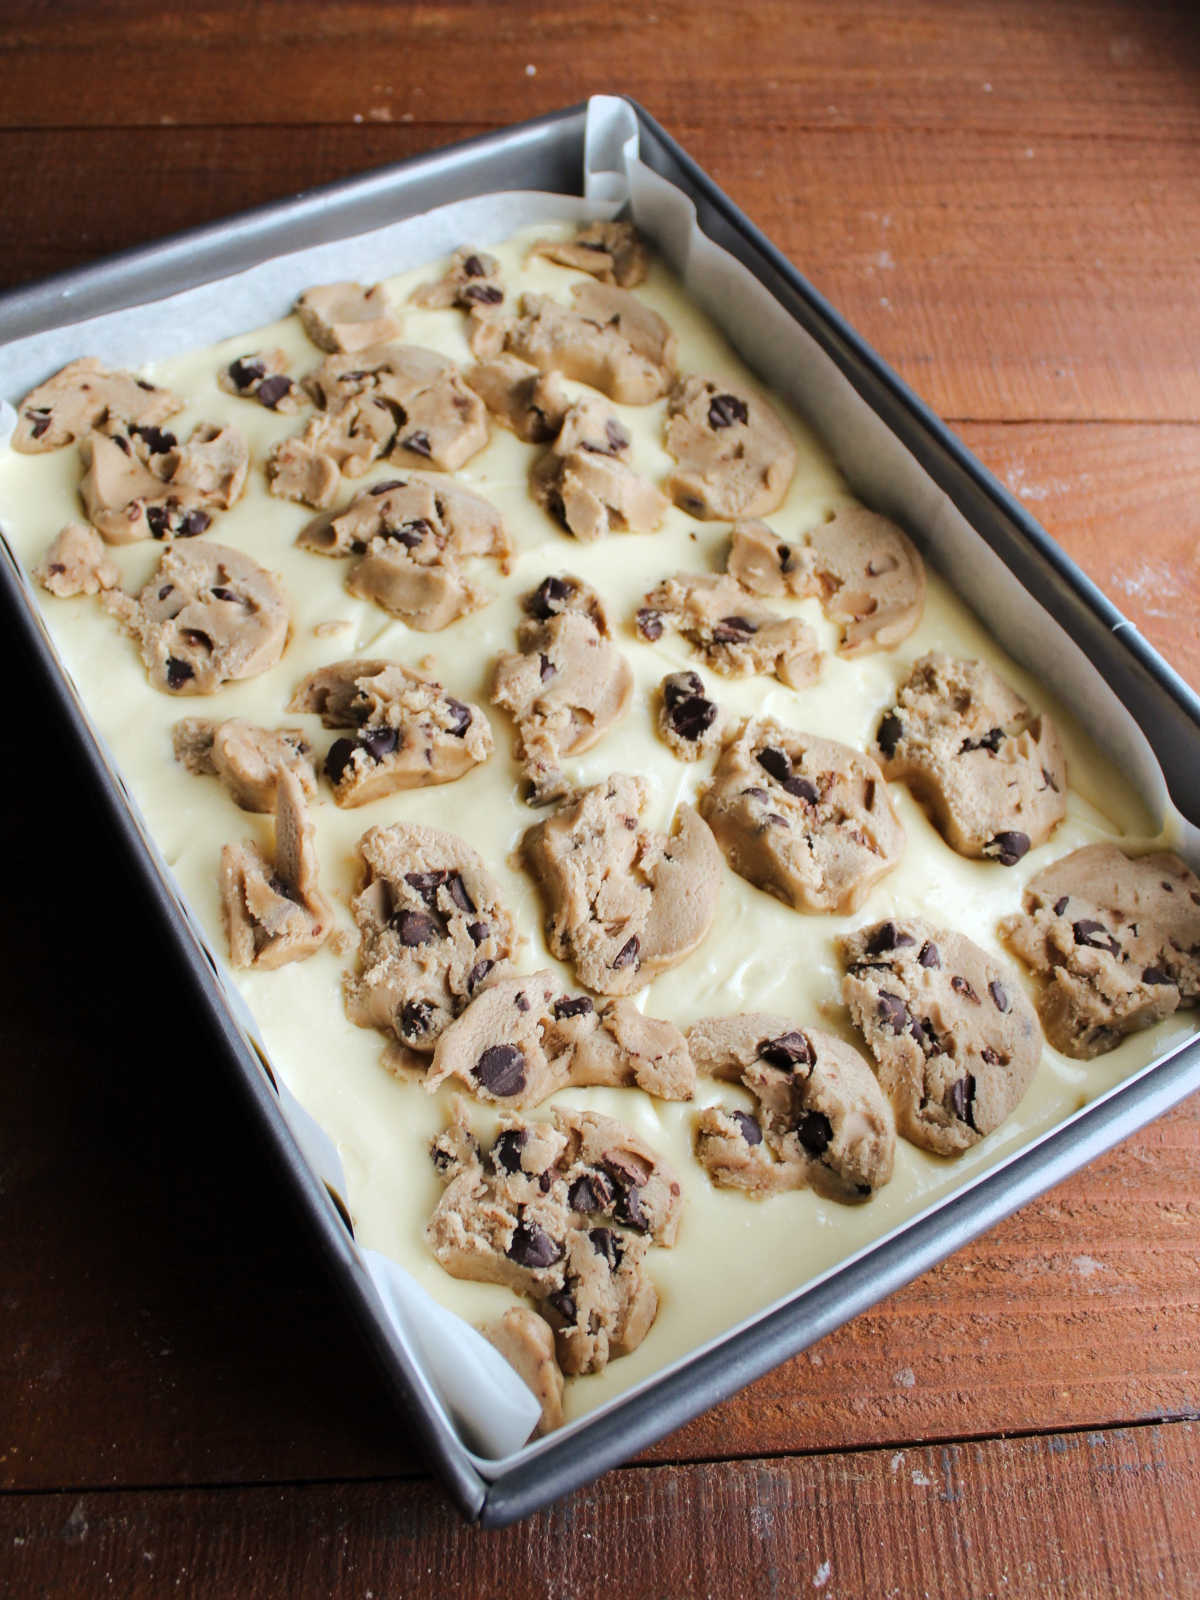 Chocolate chip cookie dough distributed over cheesecake mixture in pan, ready to bake.